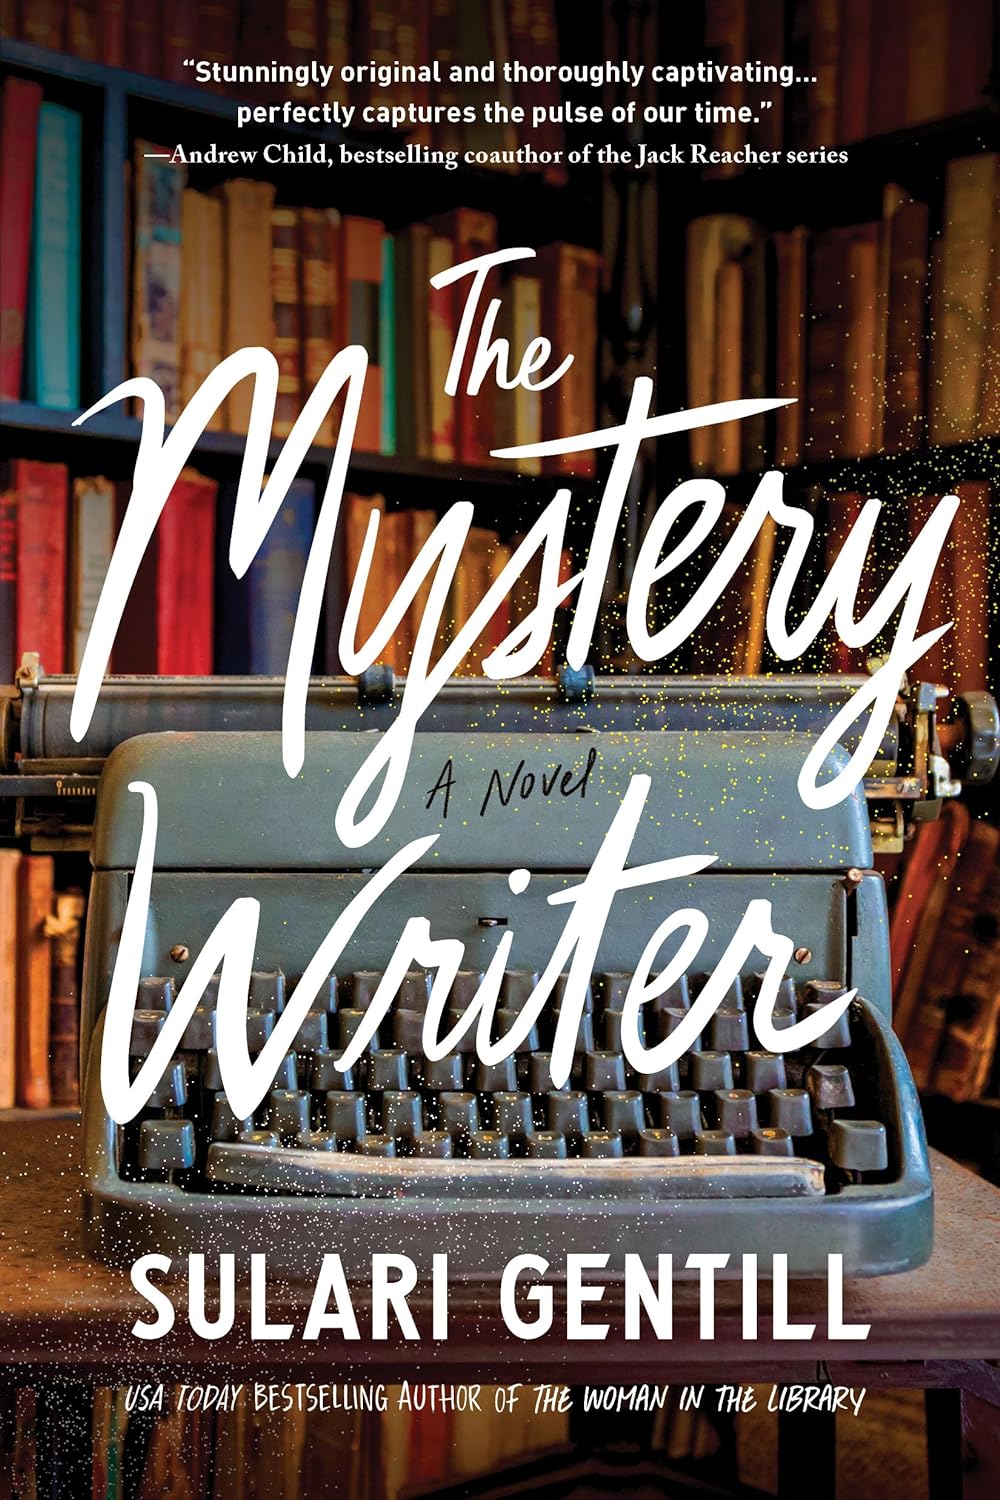 Image for "The Mystery Writer"